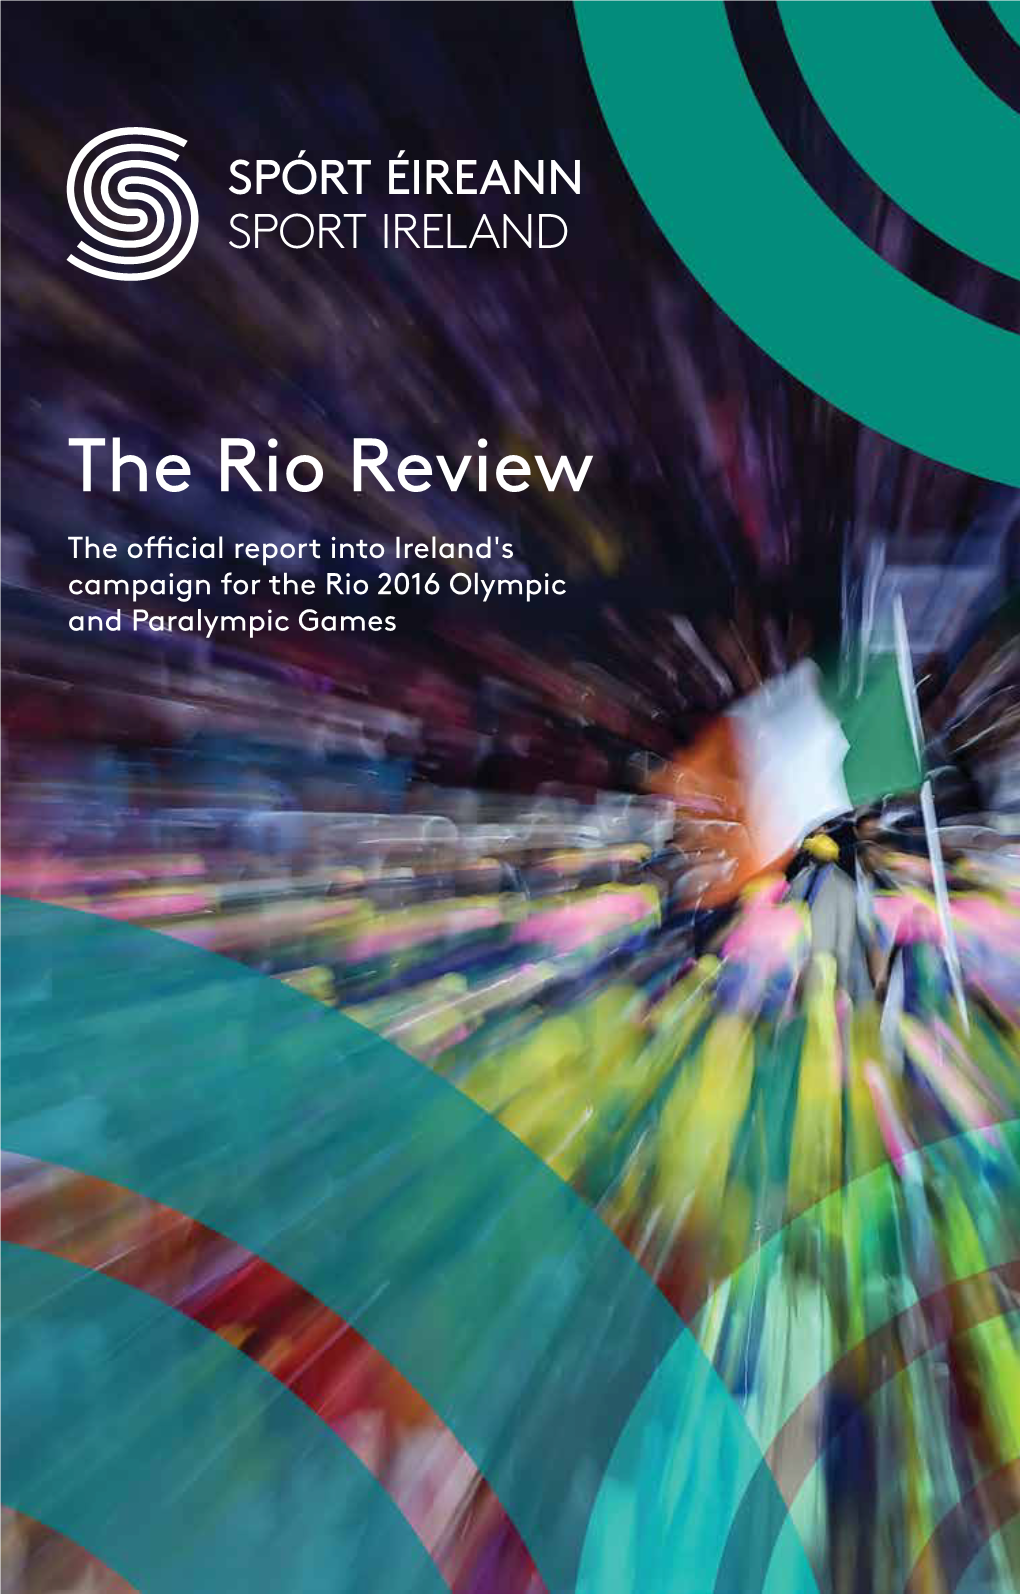 The Rio Review the Official Report Into Ireland's Campaign for the Rio 2016 Olympic and Paralympic Games